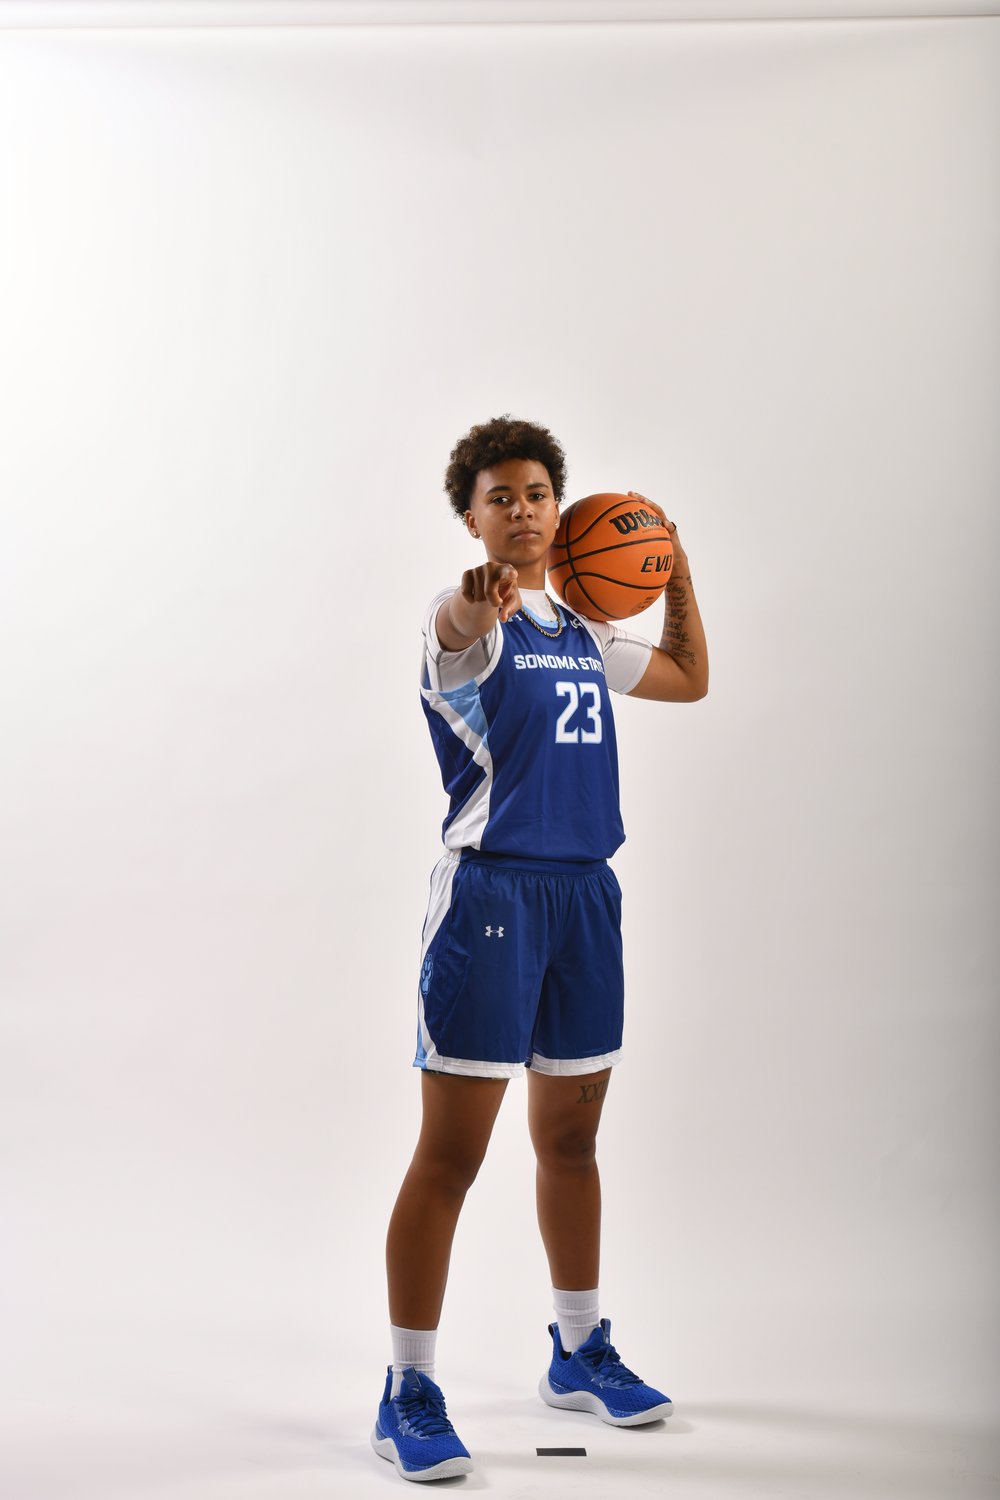 Sonoma State University Women's Basketball player Eryn Gardner holding a basketball in one hand and pointing at the viewer with the other